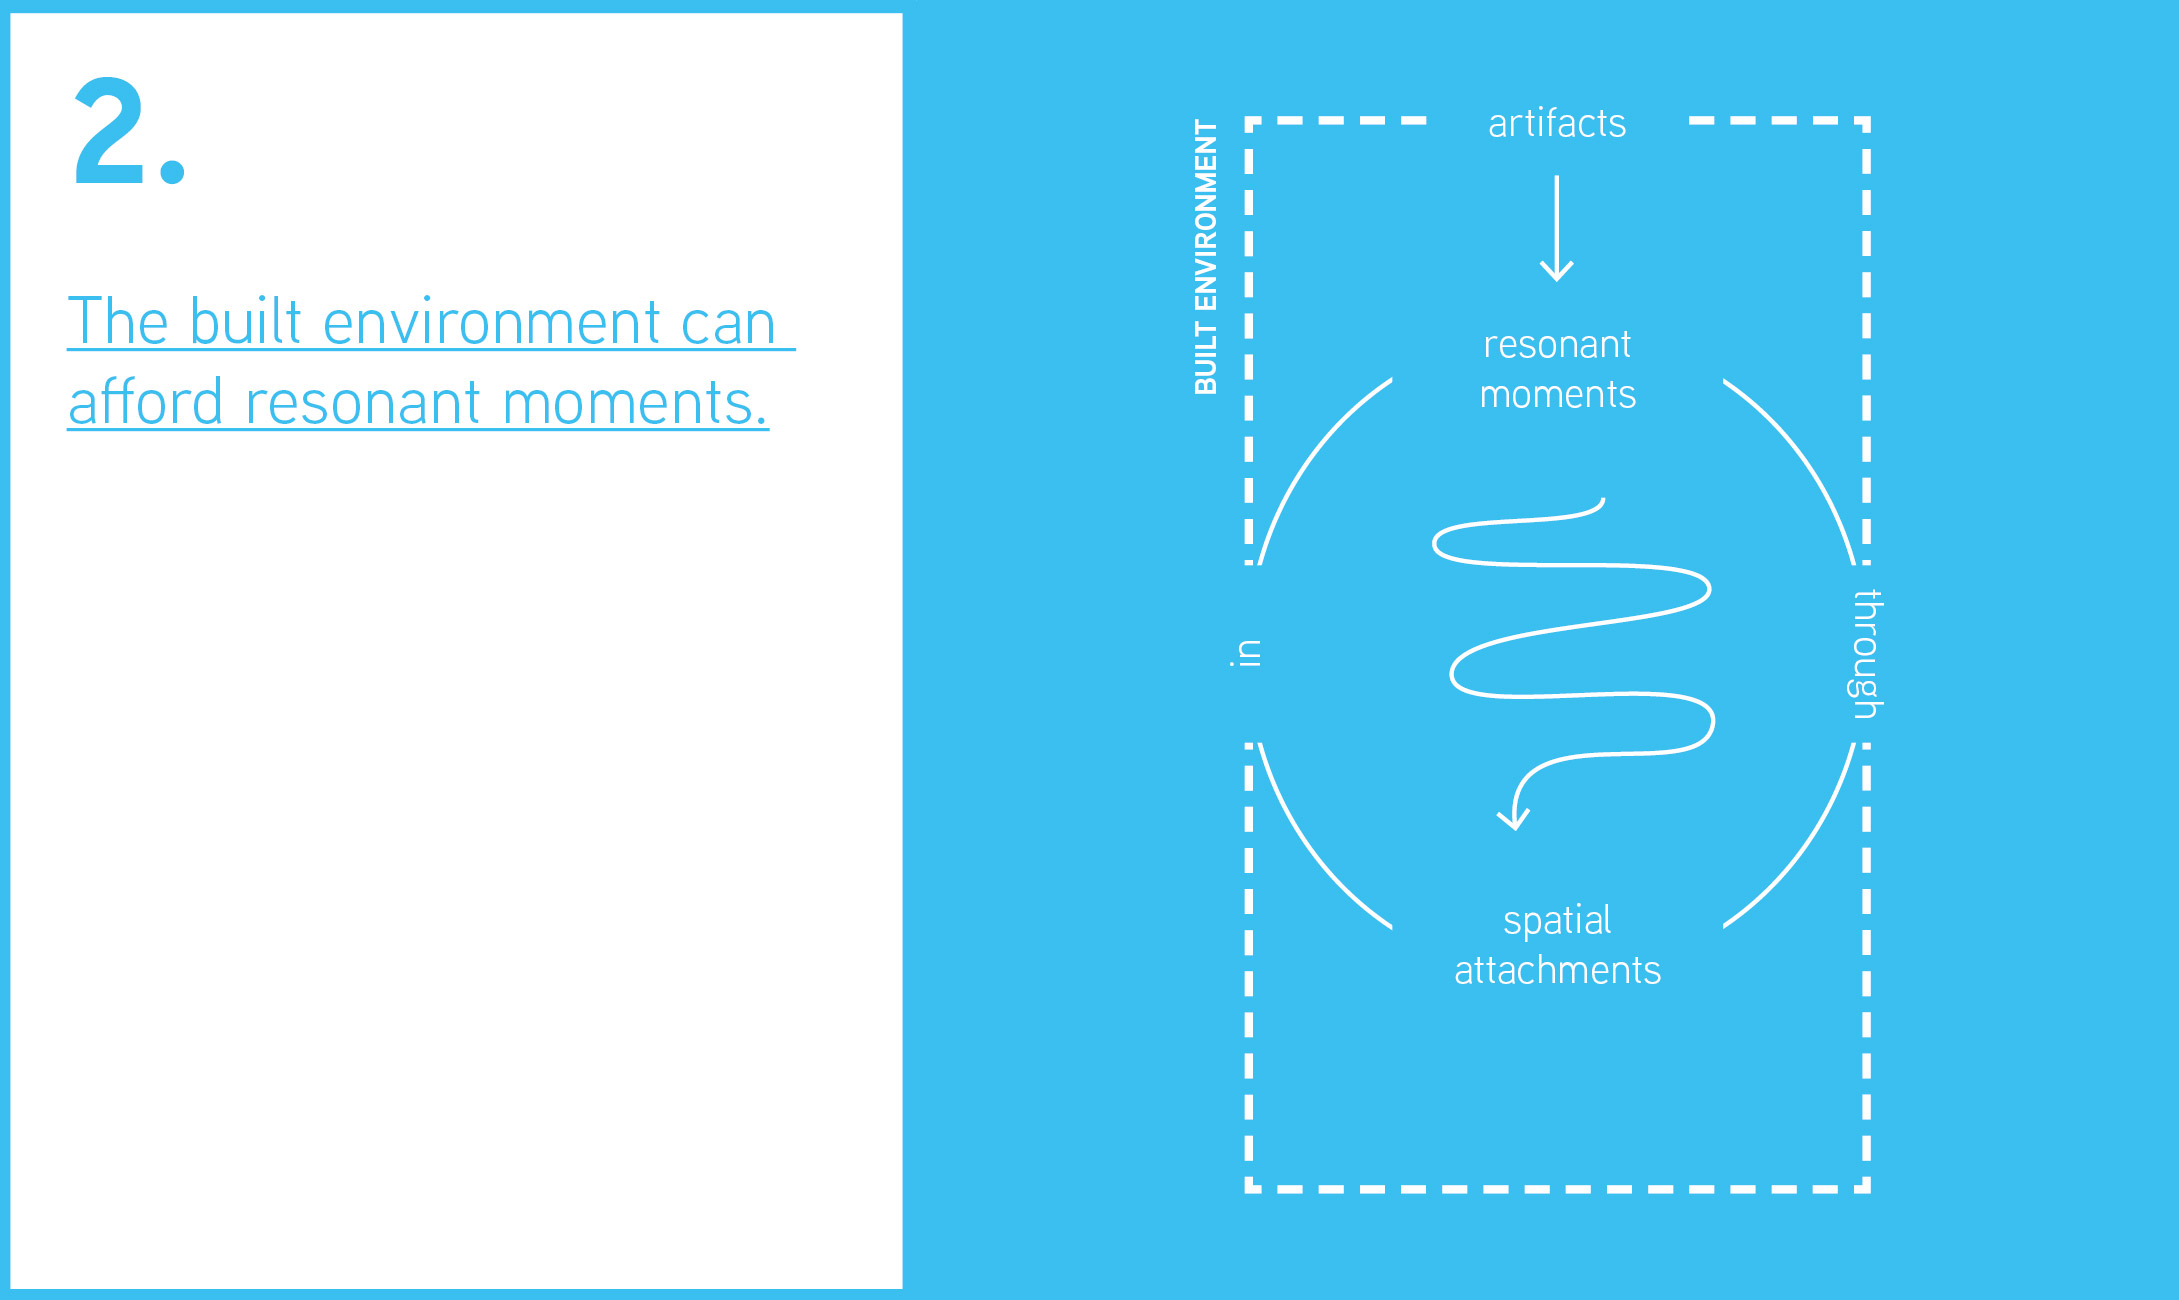 This figures shows the same content as figure two, with the term artifacts placed above resonant moments.